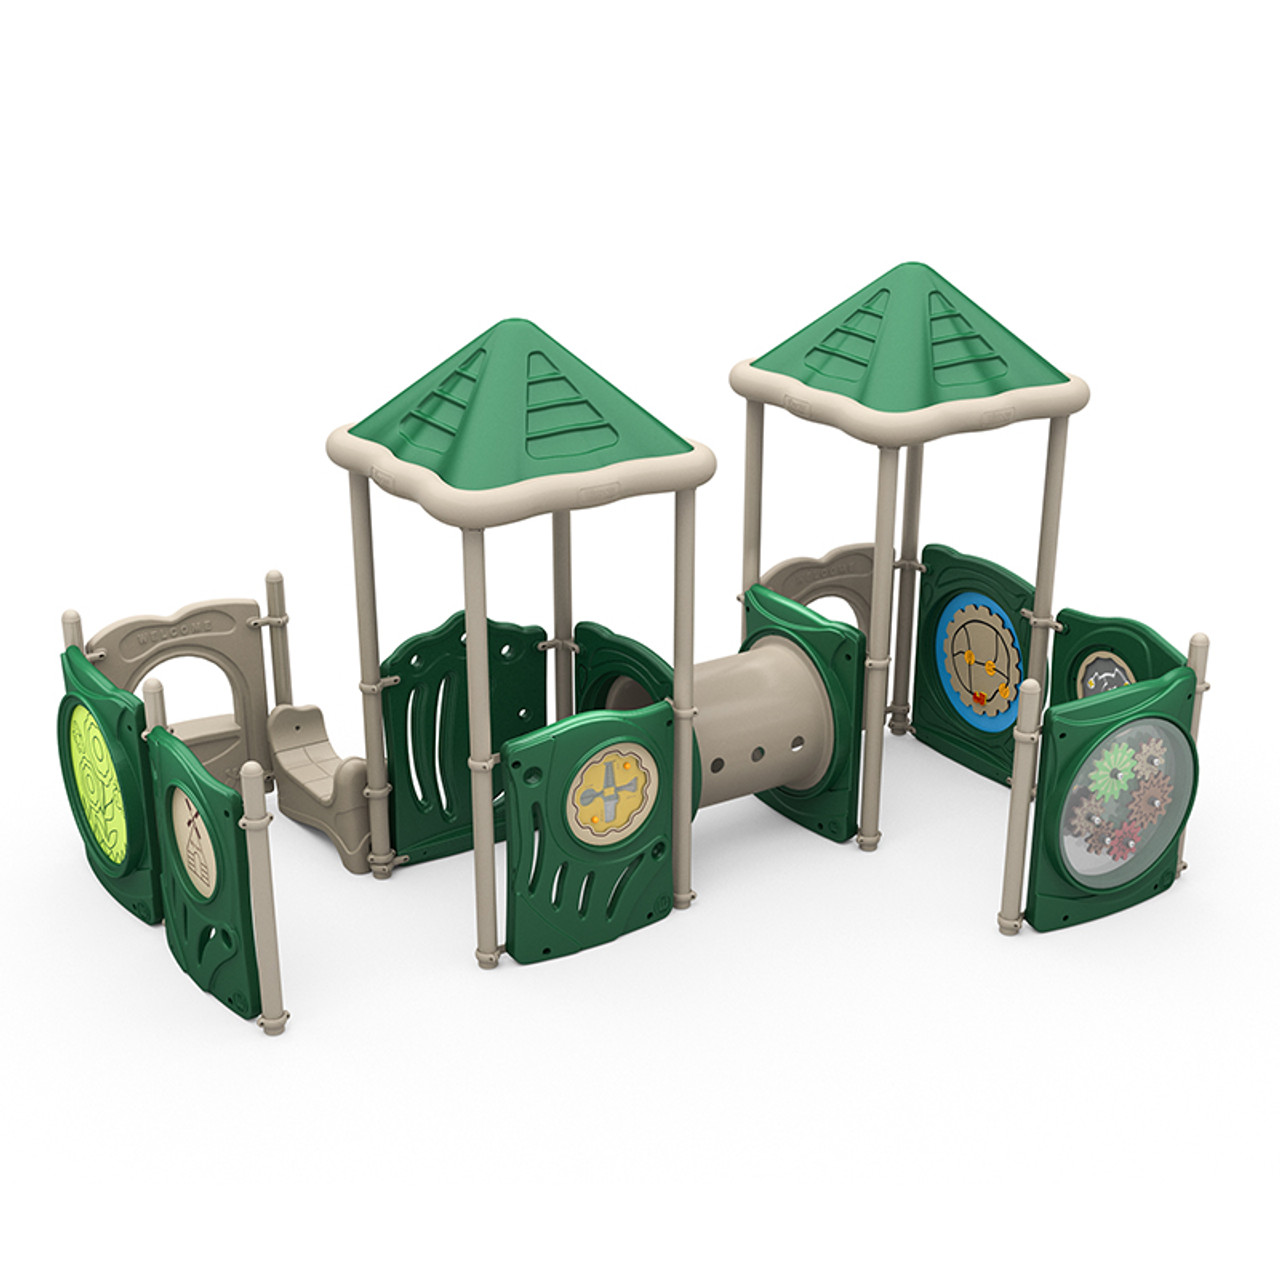 Yesteryear Playset - pyramid roof - nature colors 